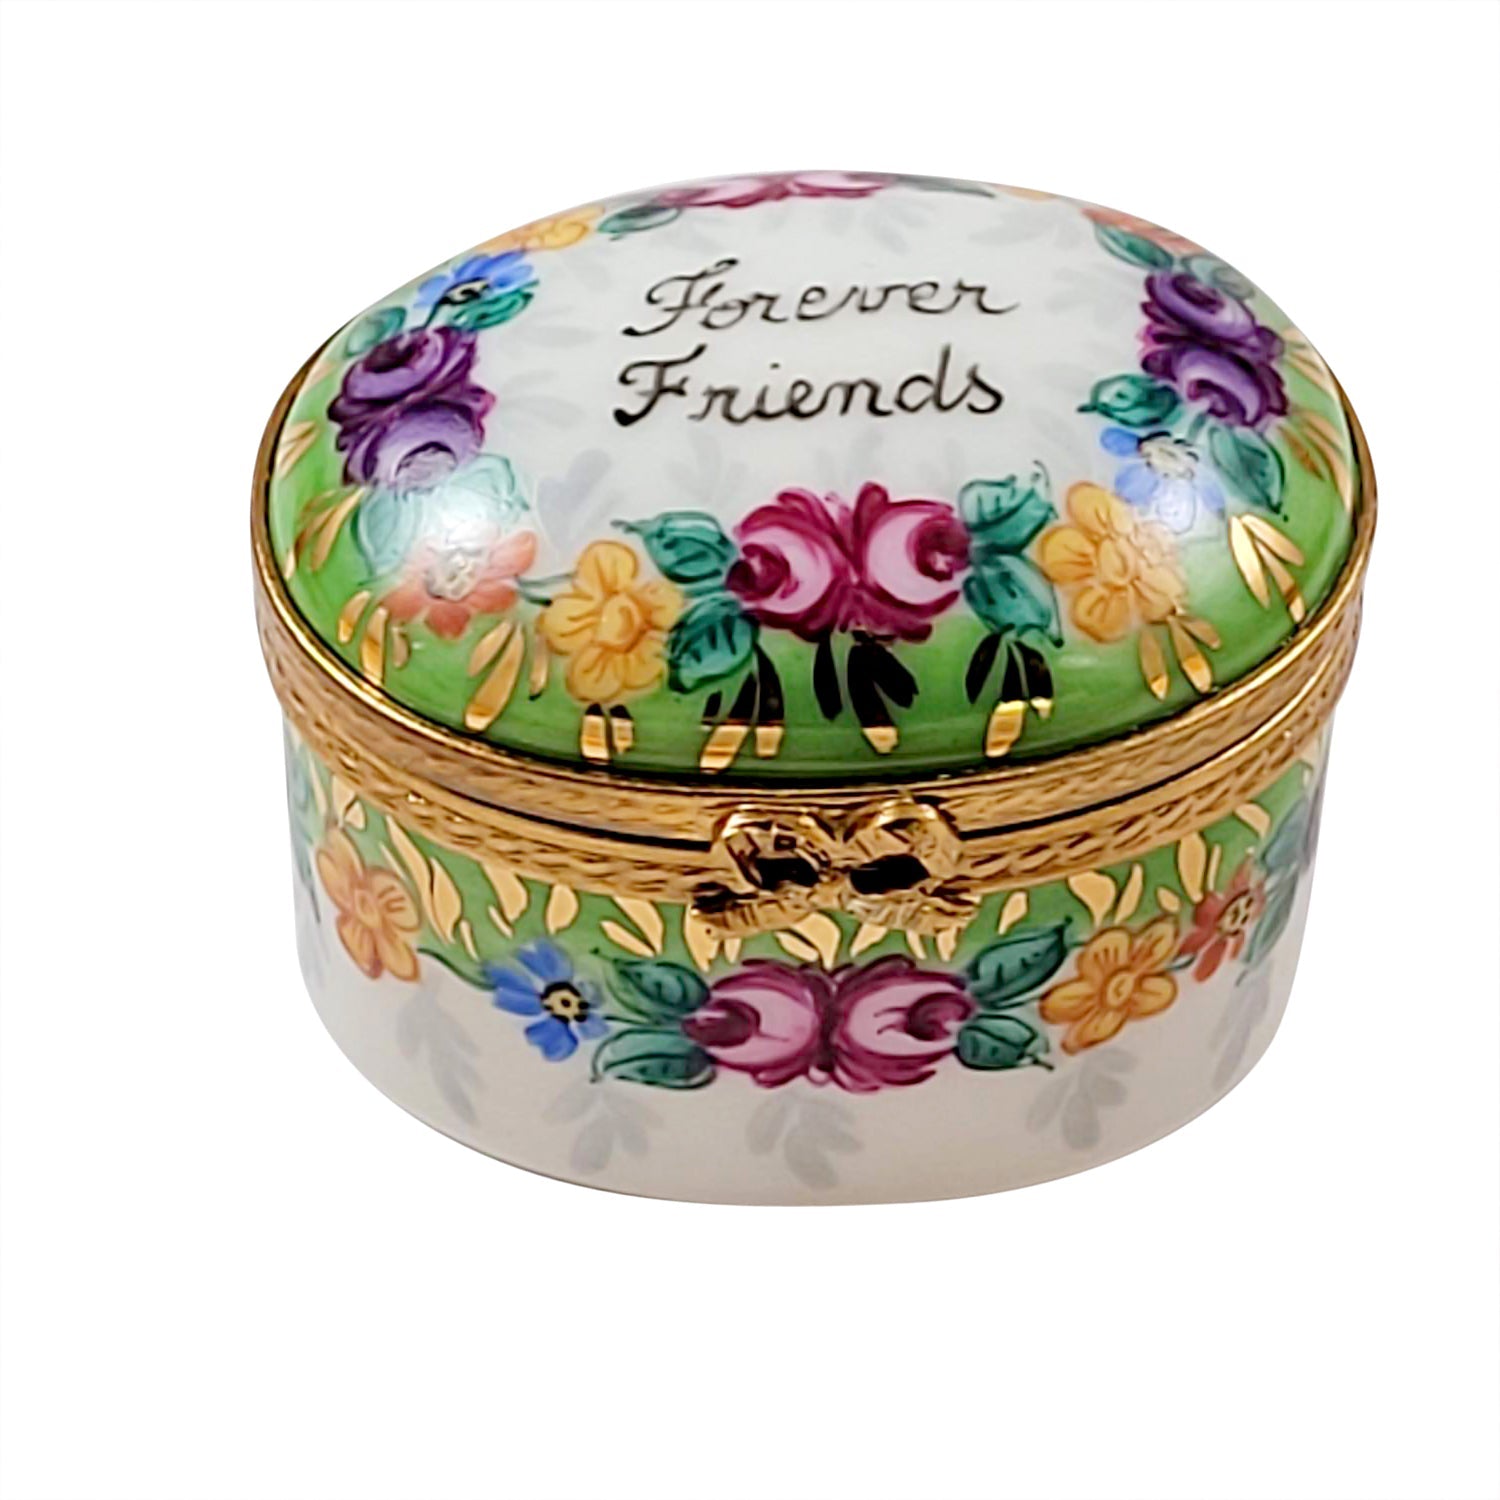 Forever Friends with Flowers Limoges Porcelain Box